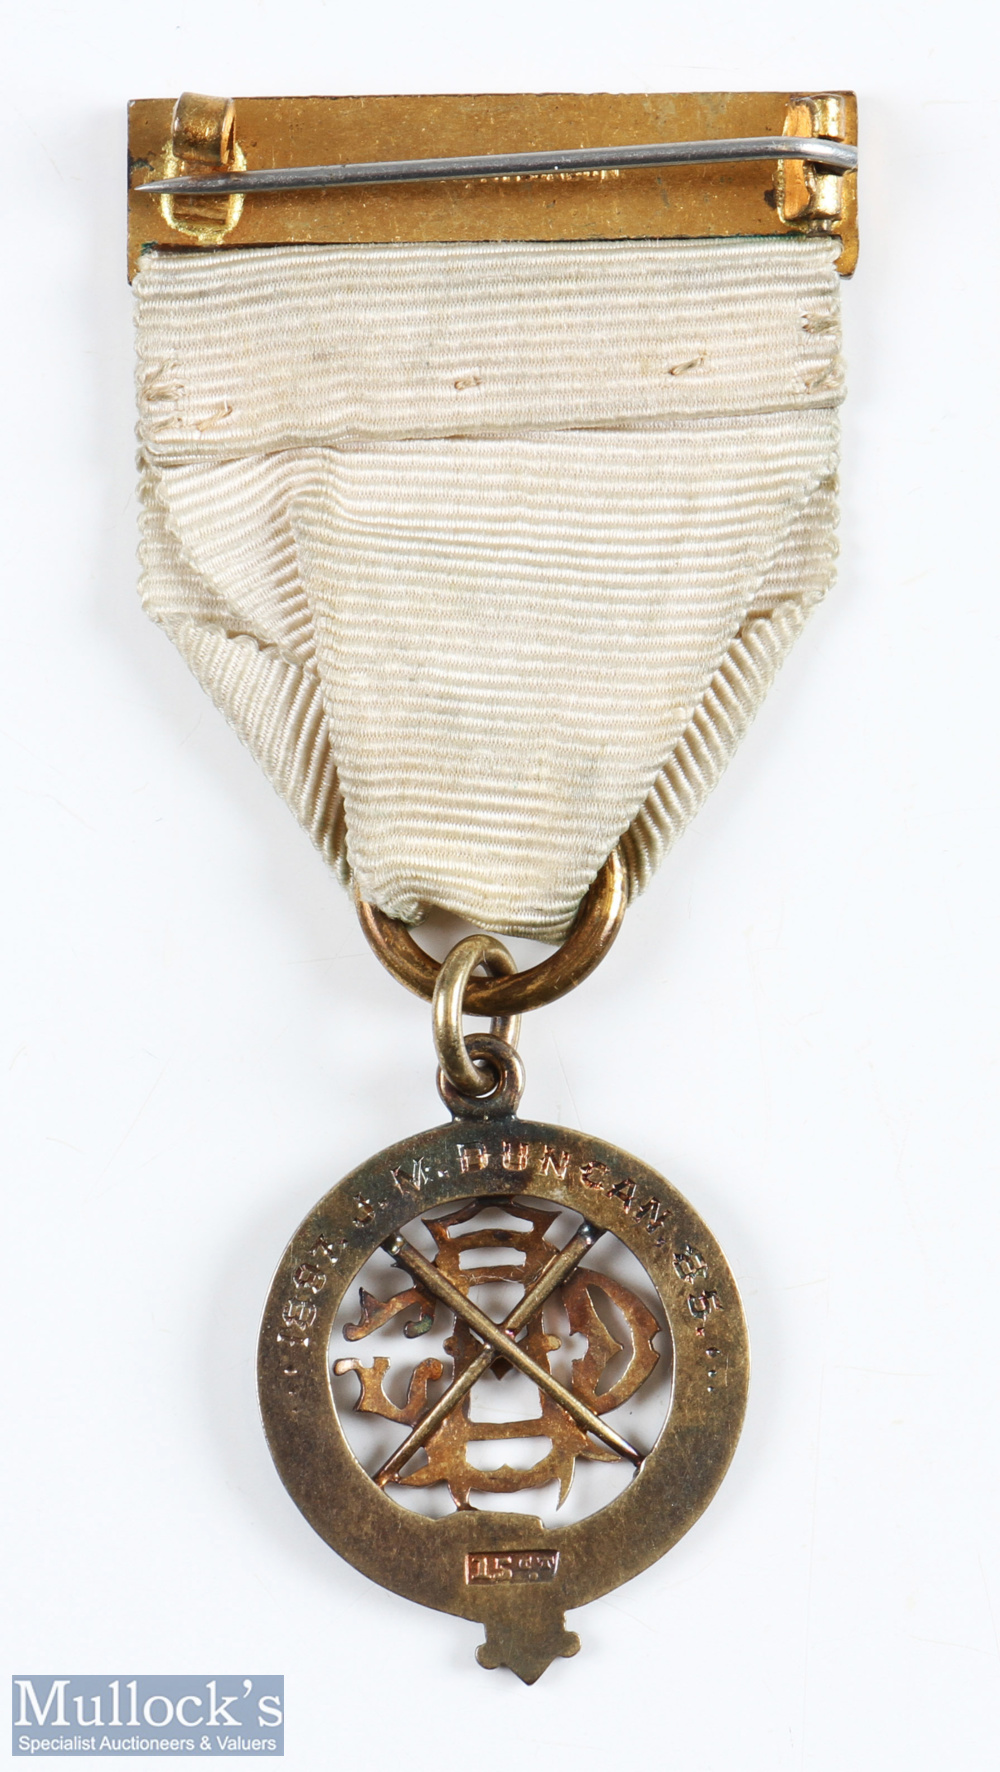 1897 Aberdeen Golf Club 15ct Gold Medal - featuring the clubs crest with crossed golf clubs on the - Image 2 of 4